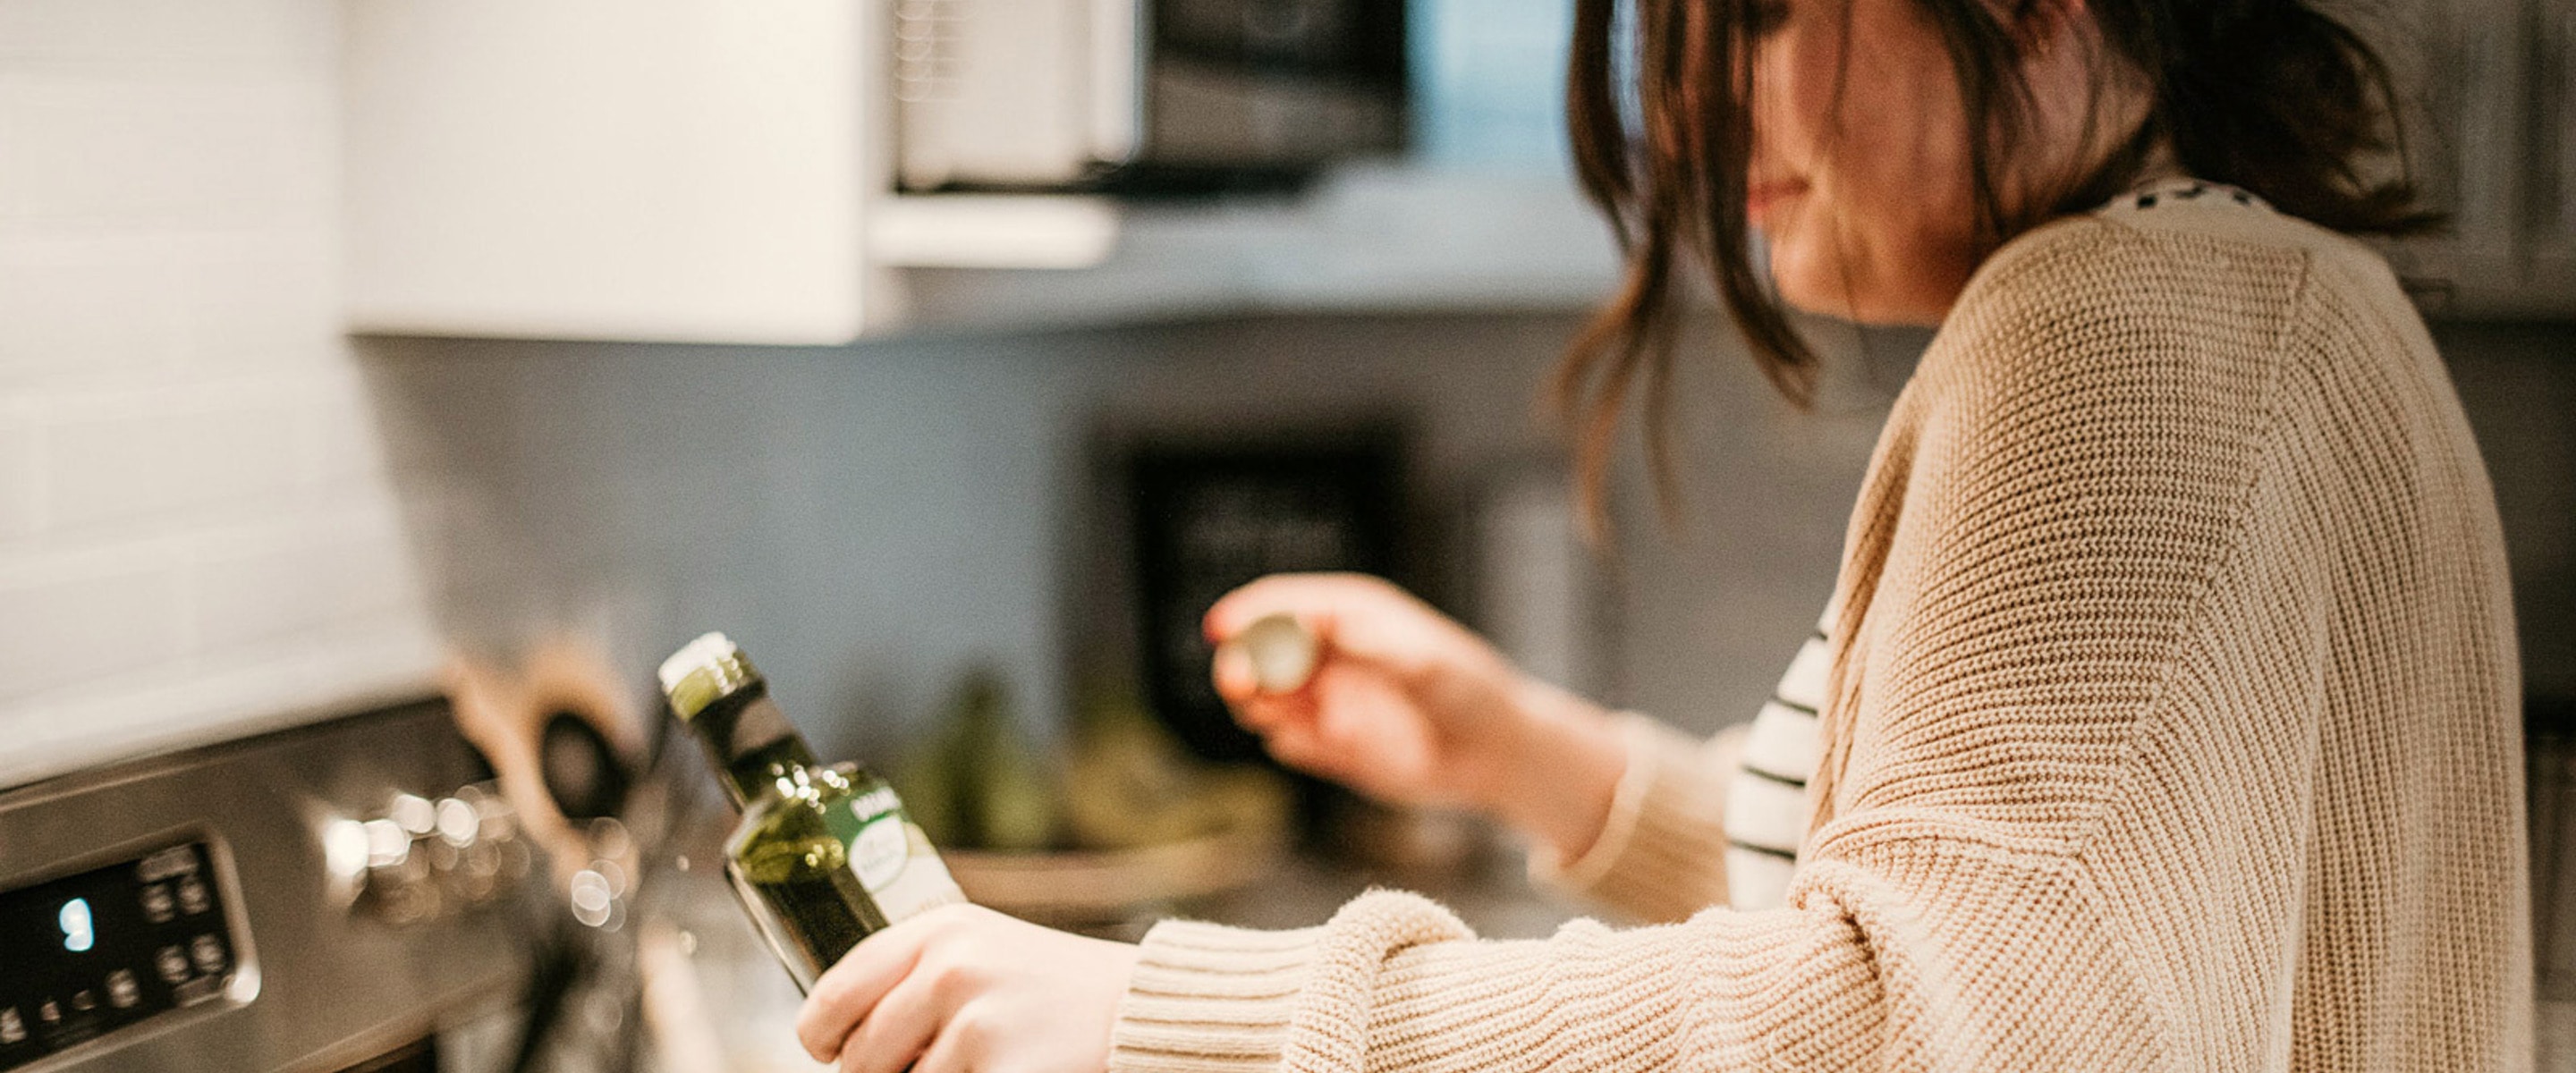 What Are the Benefits of Olive Oil? And Do You Really Need to Drink It Before Bed?&nbsp;